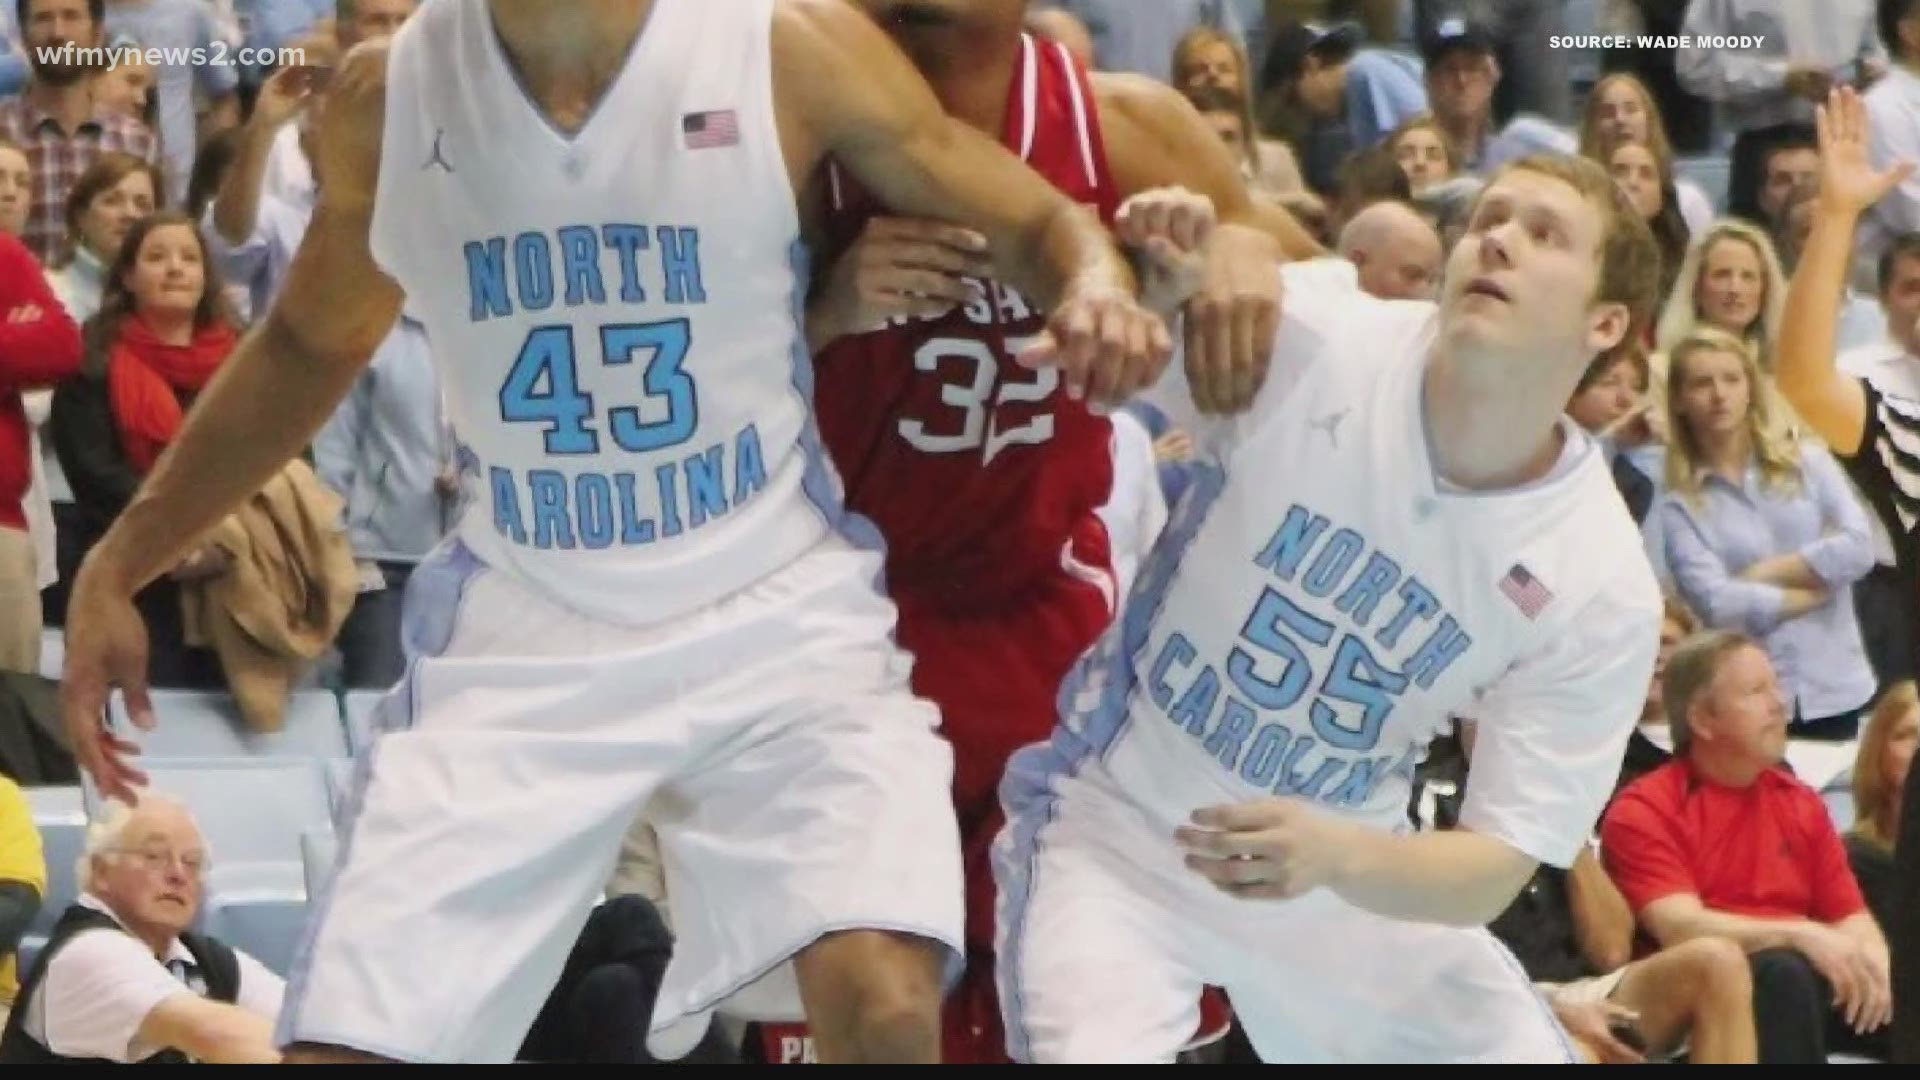 Wade Moody played for the UNC Men's Basketball Team for two years under Coach Williams.